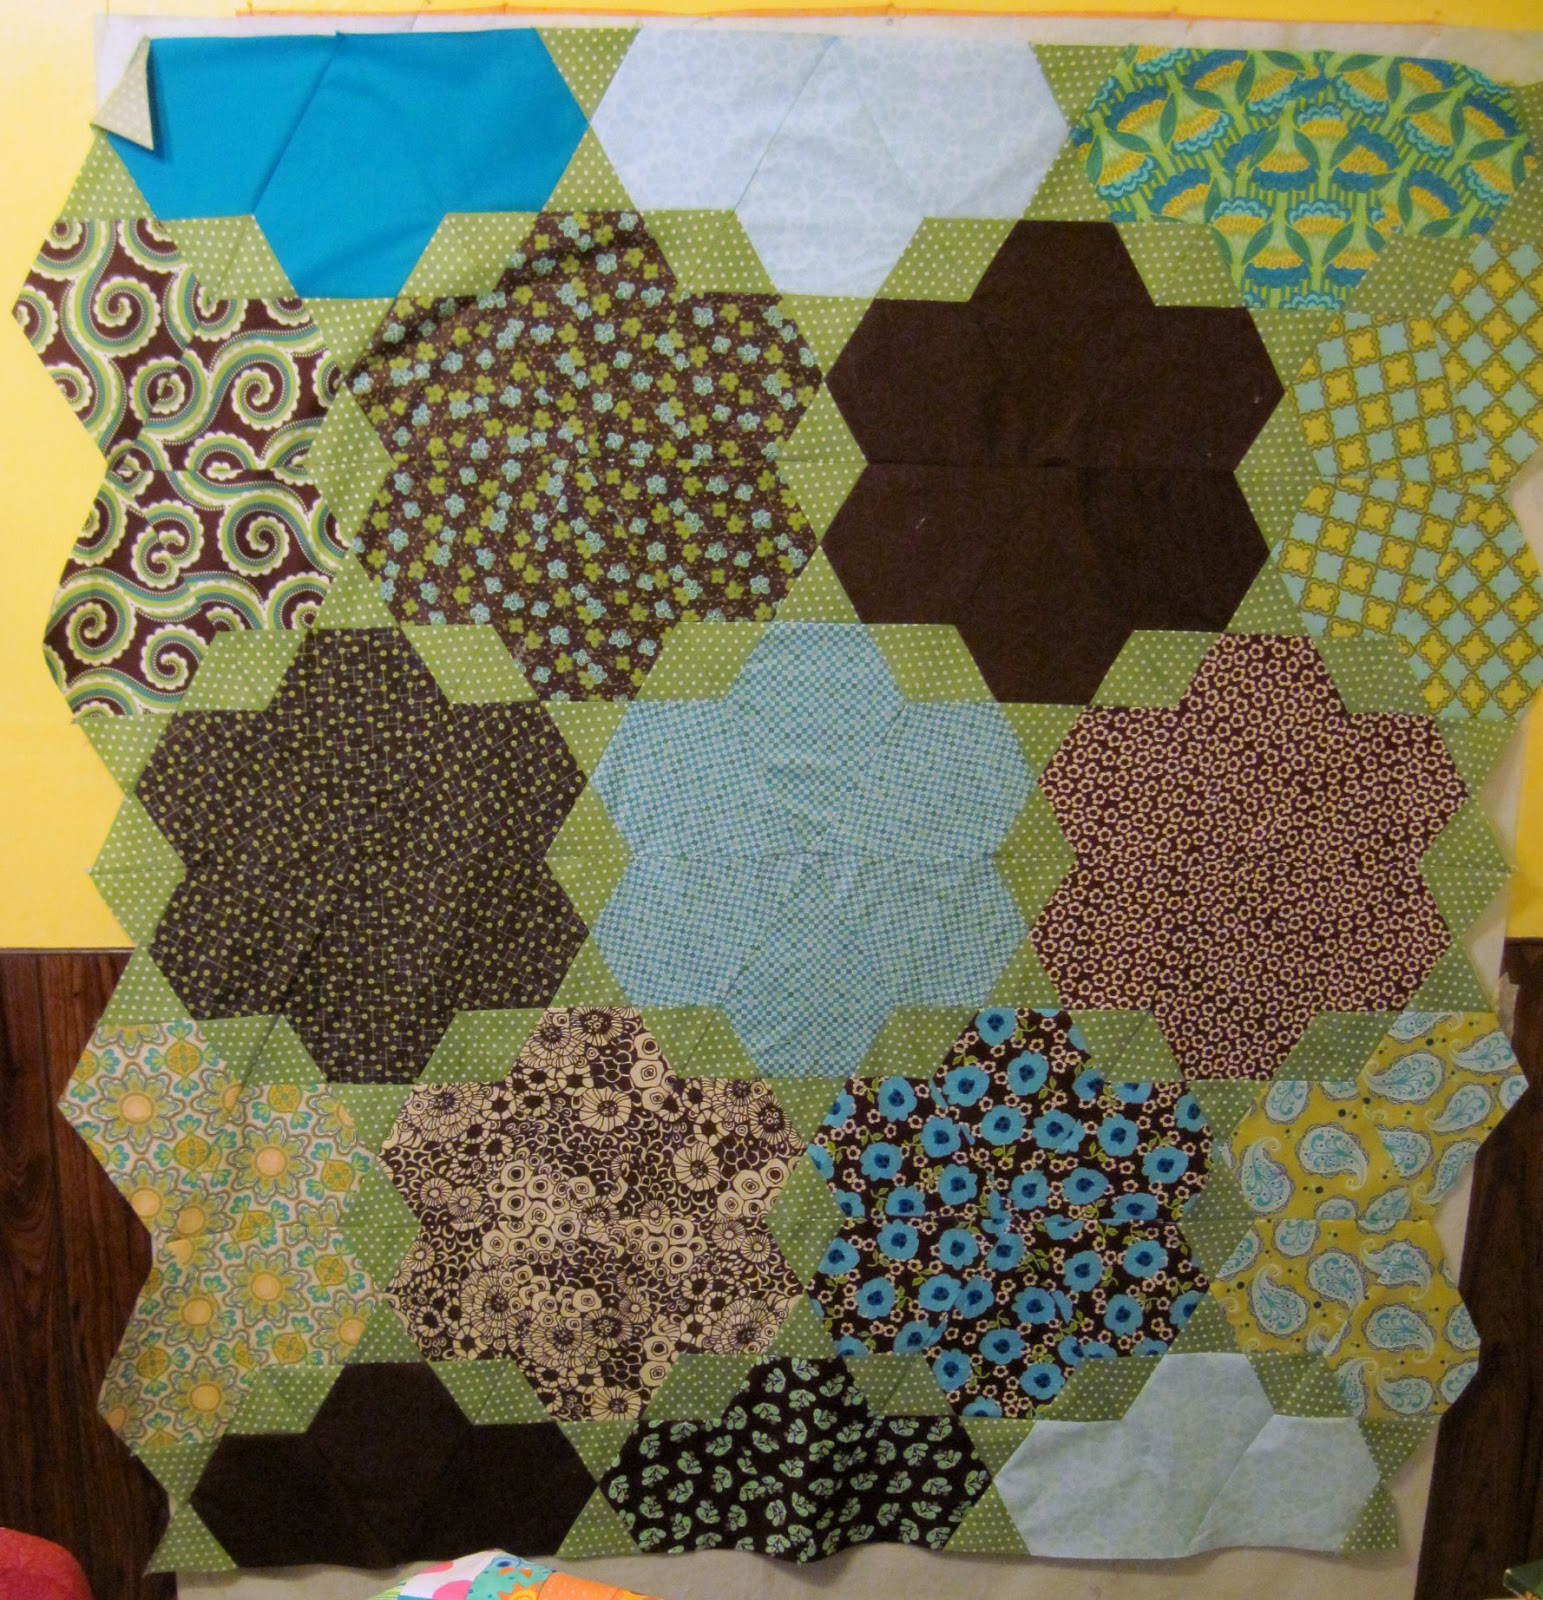 Jean's Quilting Page Lotus flowers & leftovers